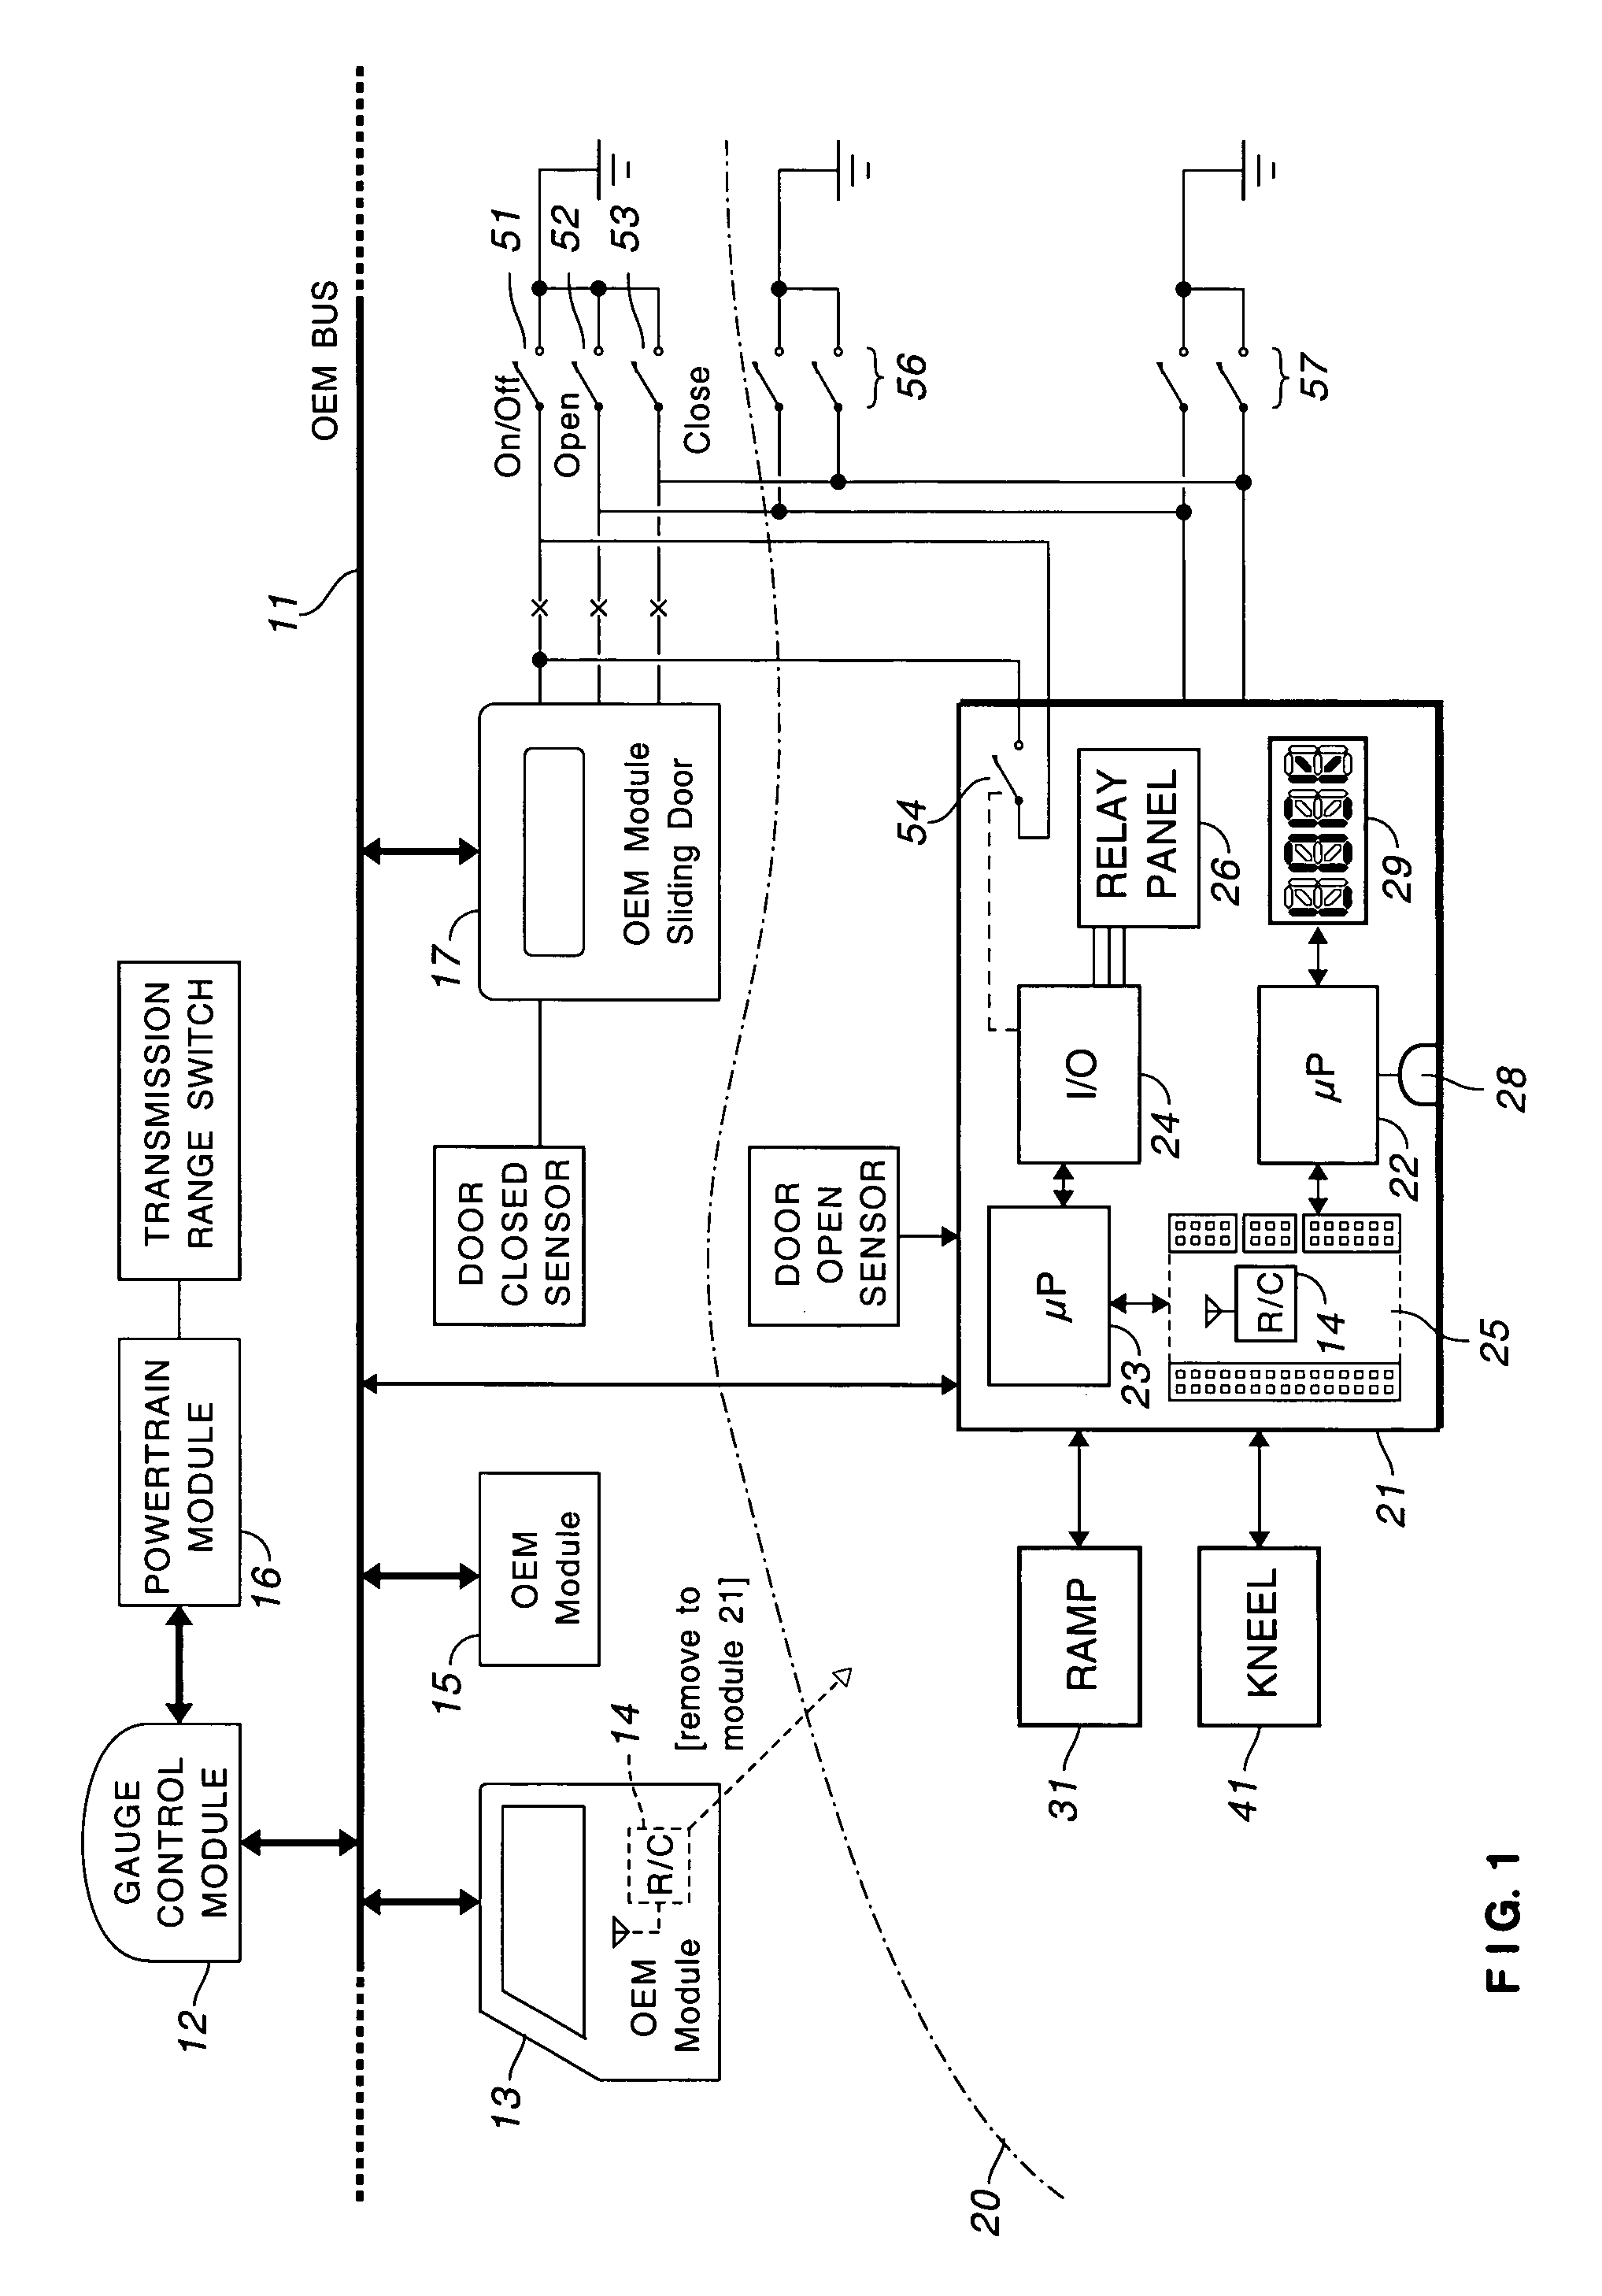 Controlled access for light duty motor vehicle